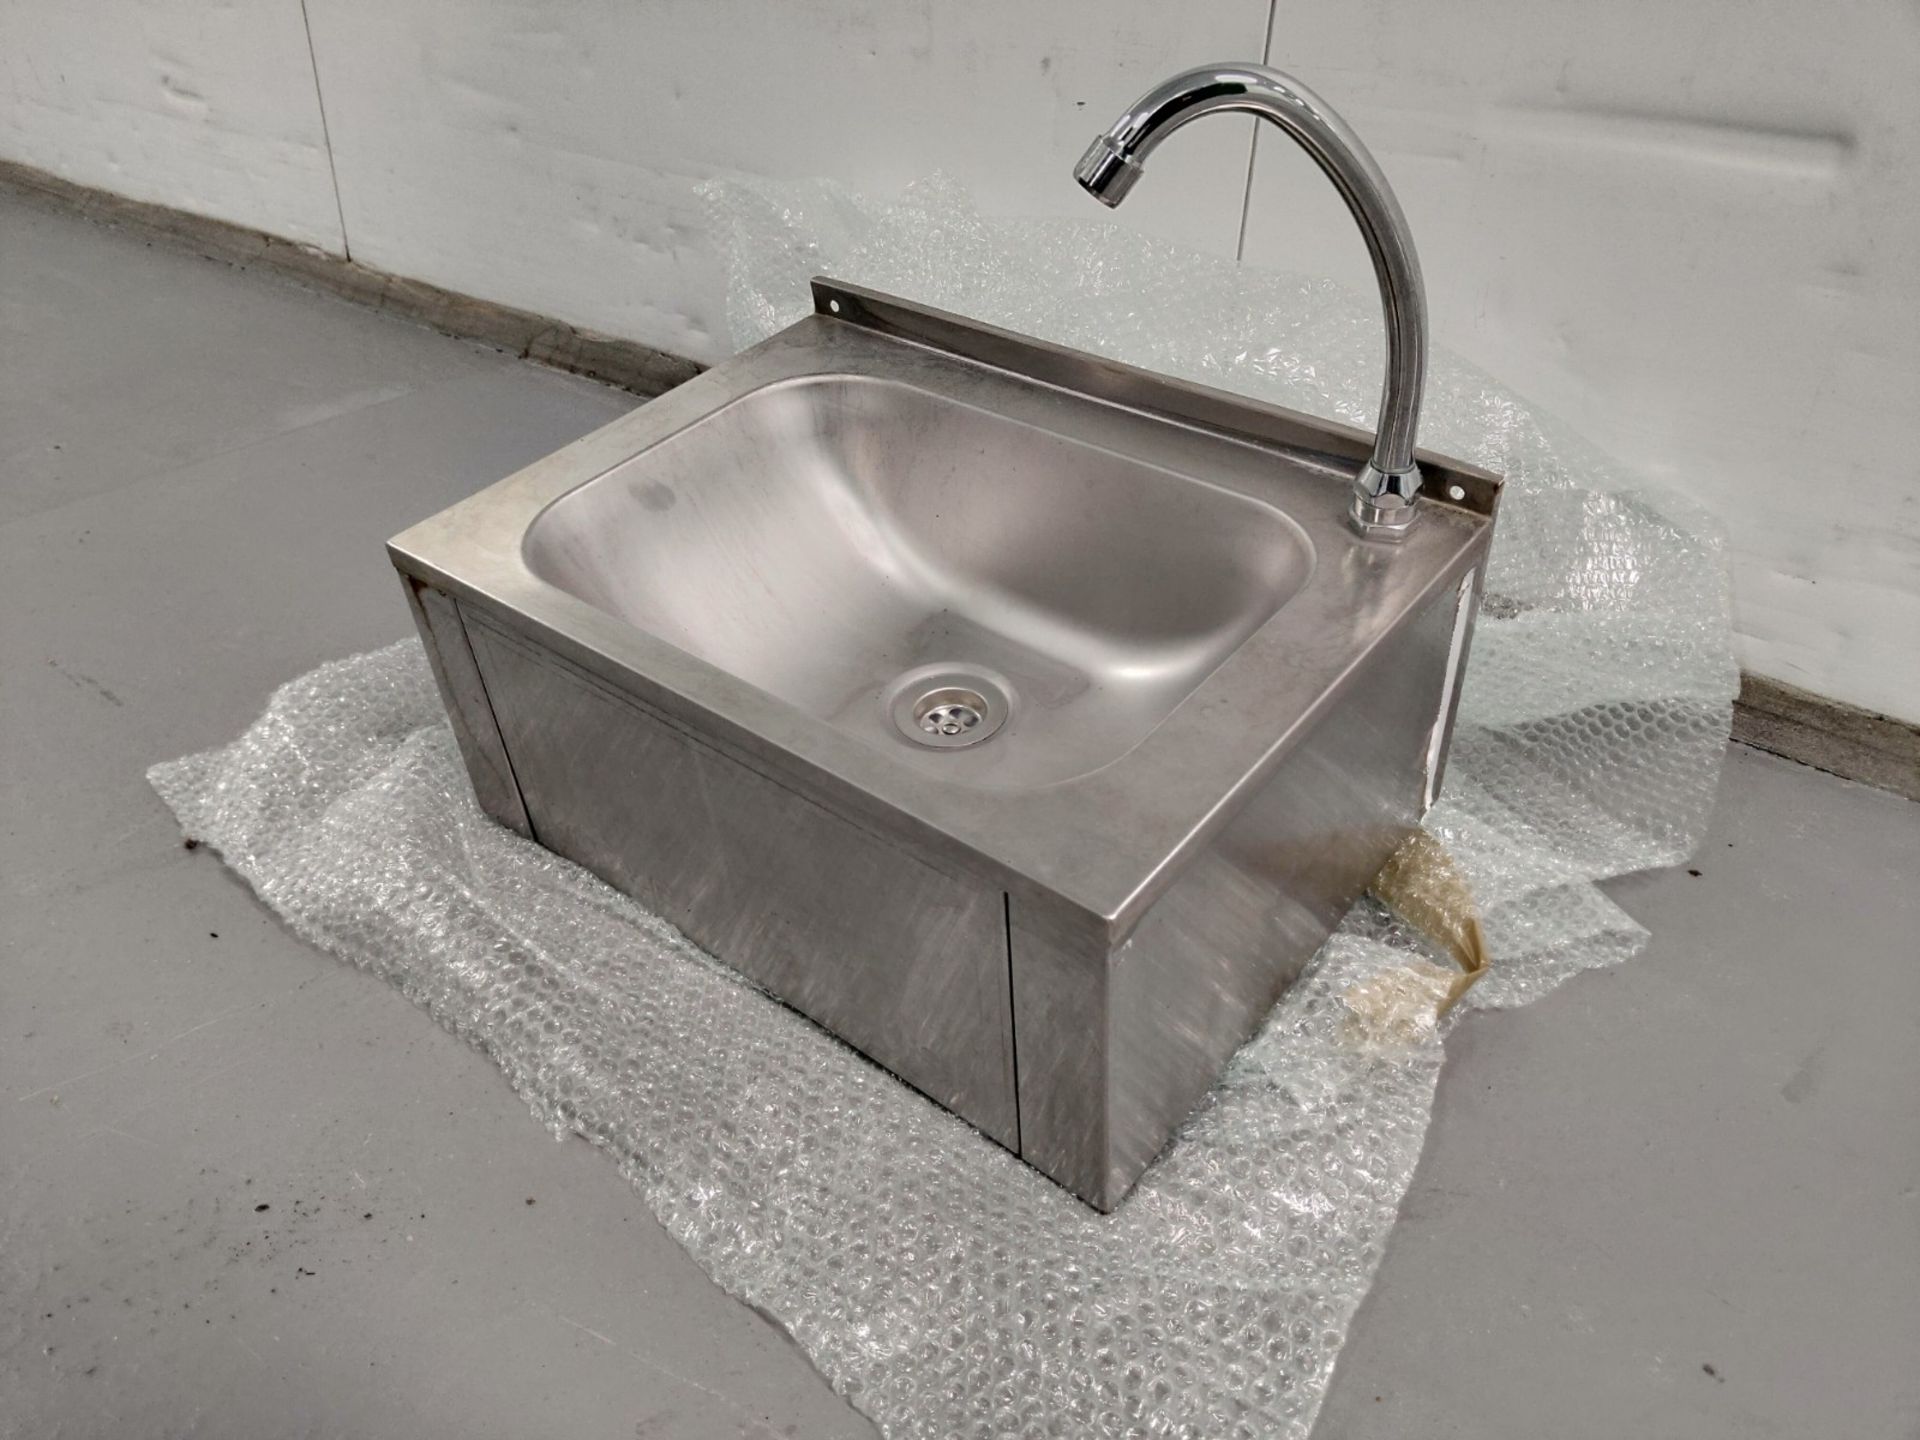 Vogue Stainless Steel Knee Operated Sink - Image 3 of 4